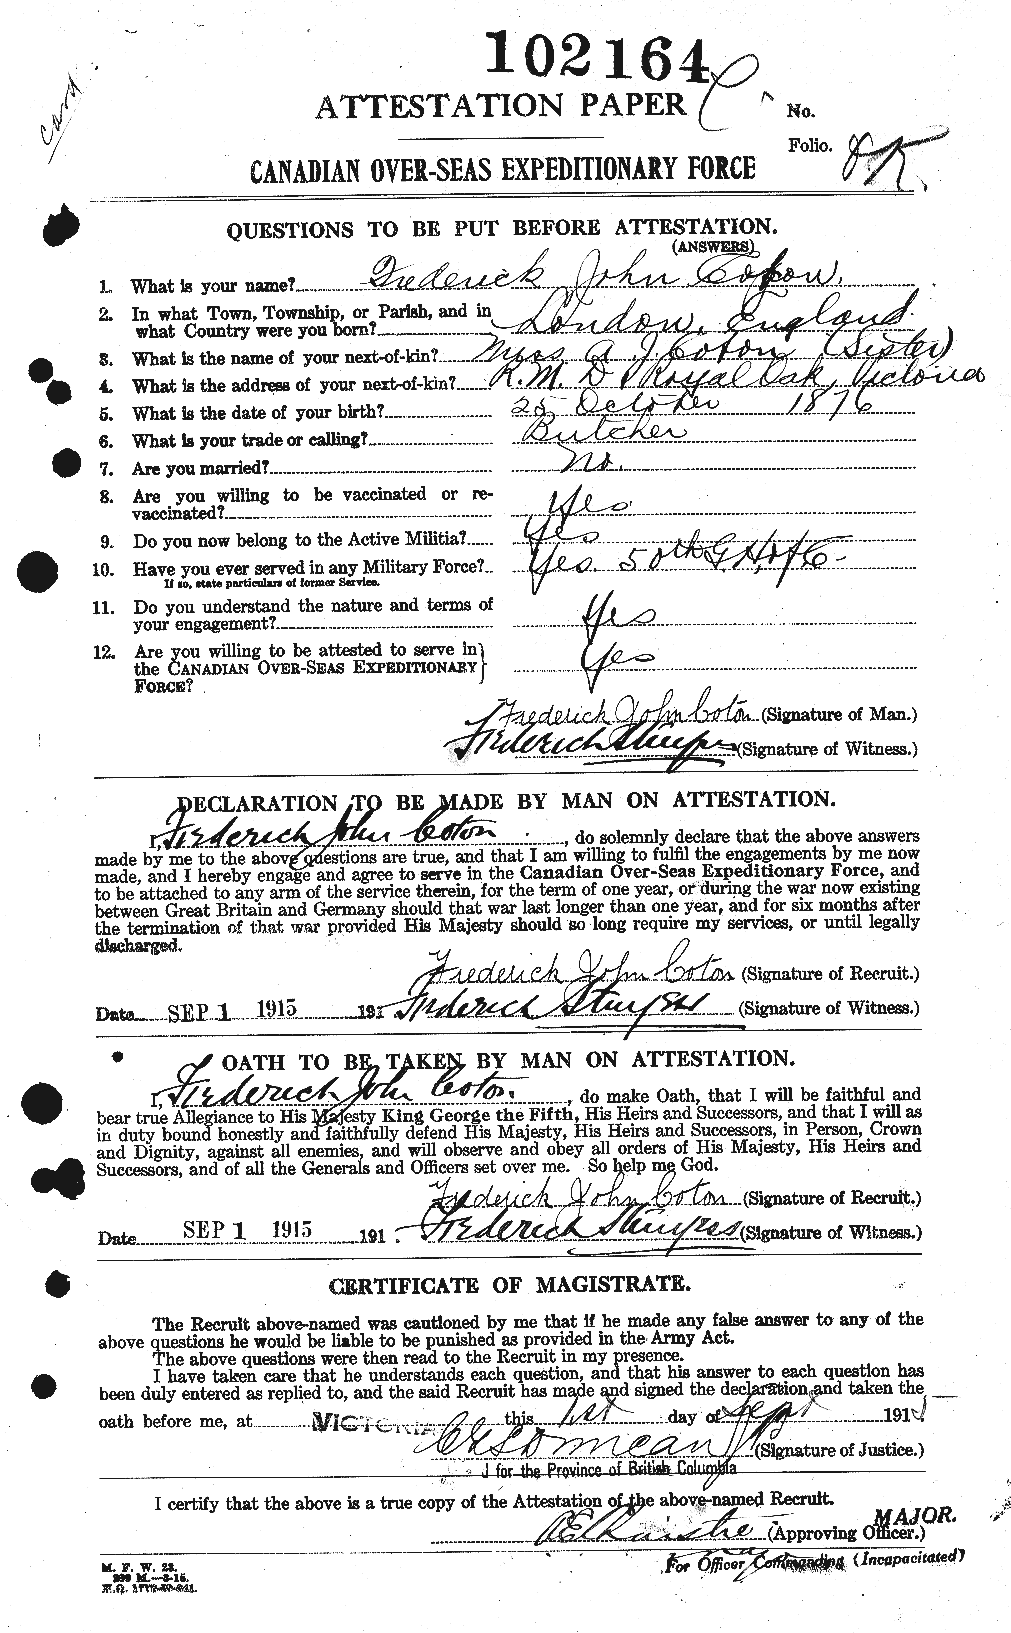 Personnel Records of the First World War - CEF 063138a